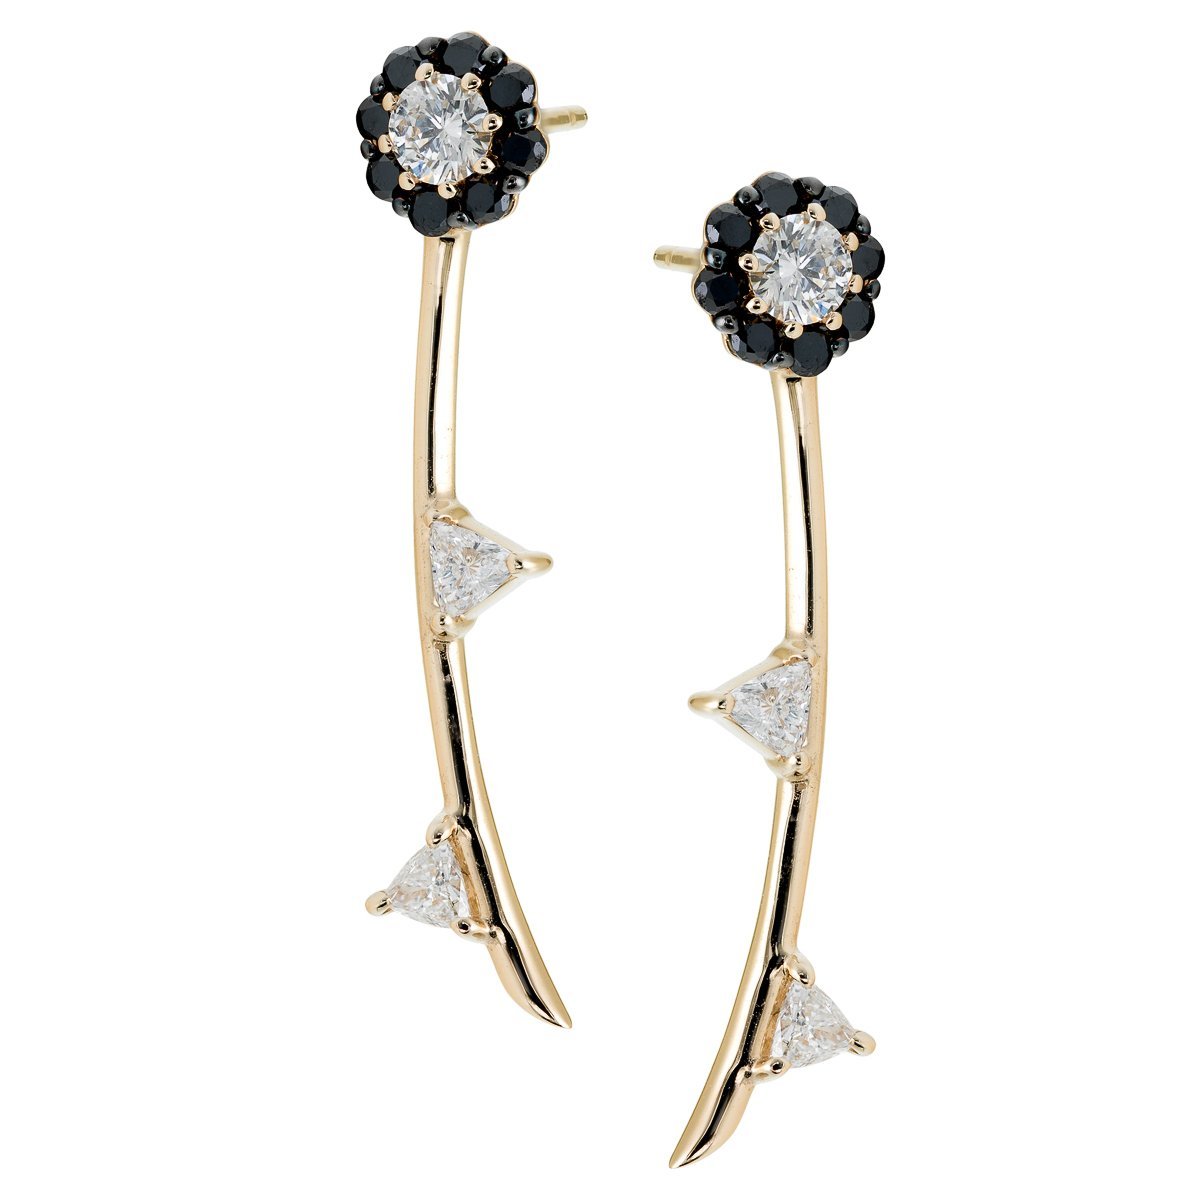 Irini Black Diamond Full Bloom Earrings with white diamond leaves in 14k gold, post back  can be work as a pair or as a single earring, a edgy design to a classic design, made in nyc